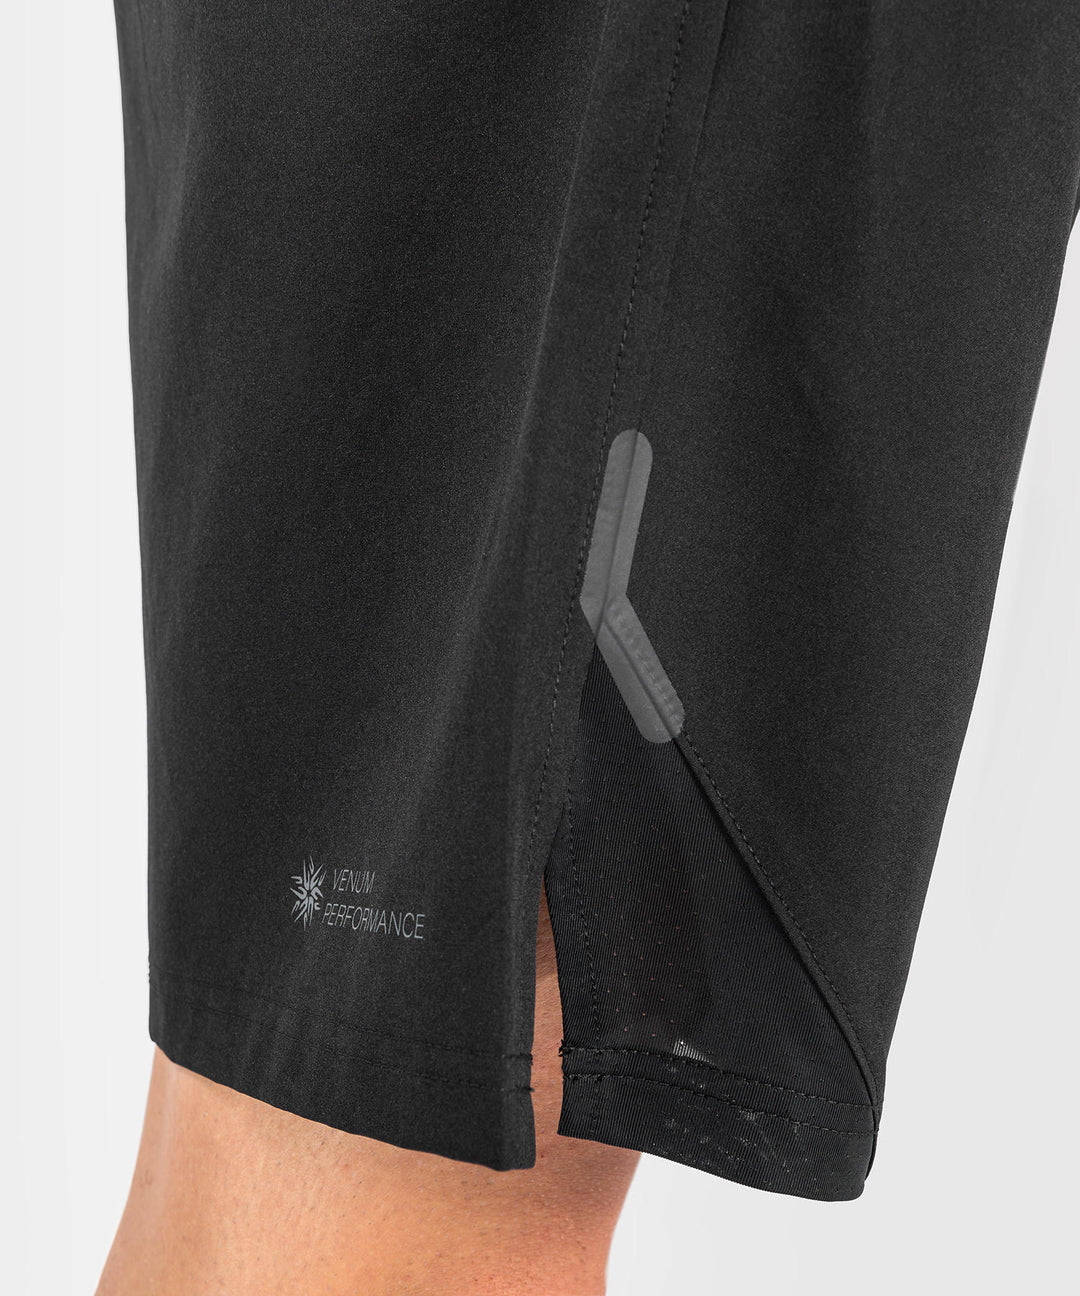 Venum G-Fit Air Training Shorts - Boxing Performance Gear Close up Side View